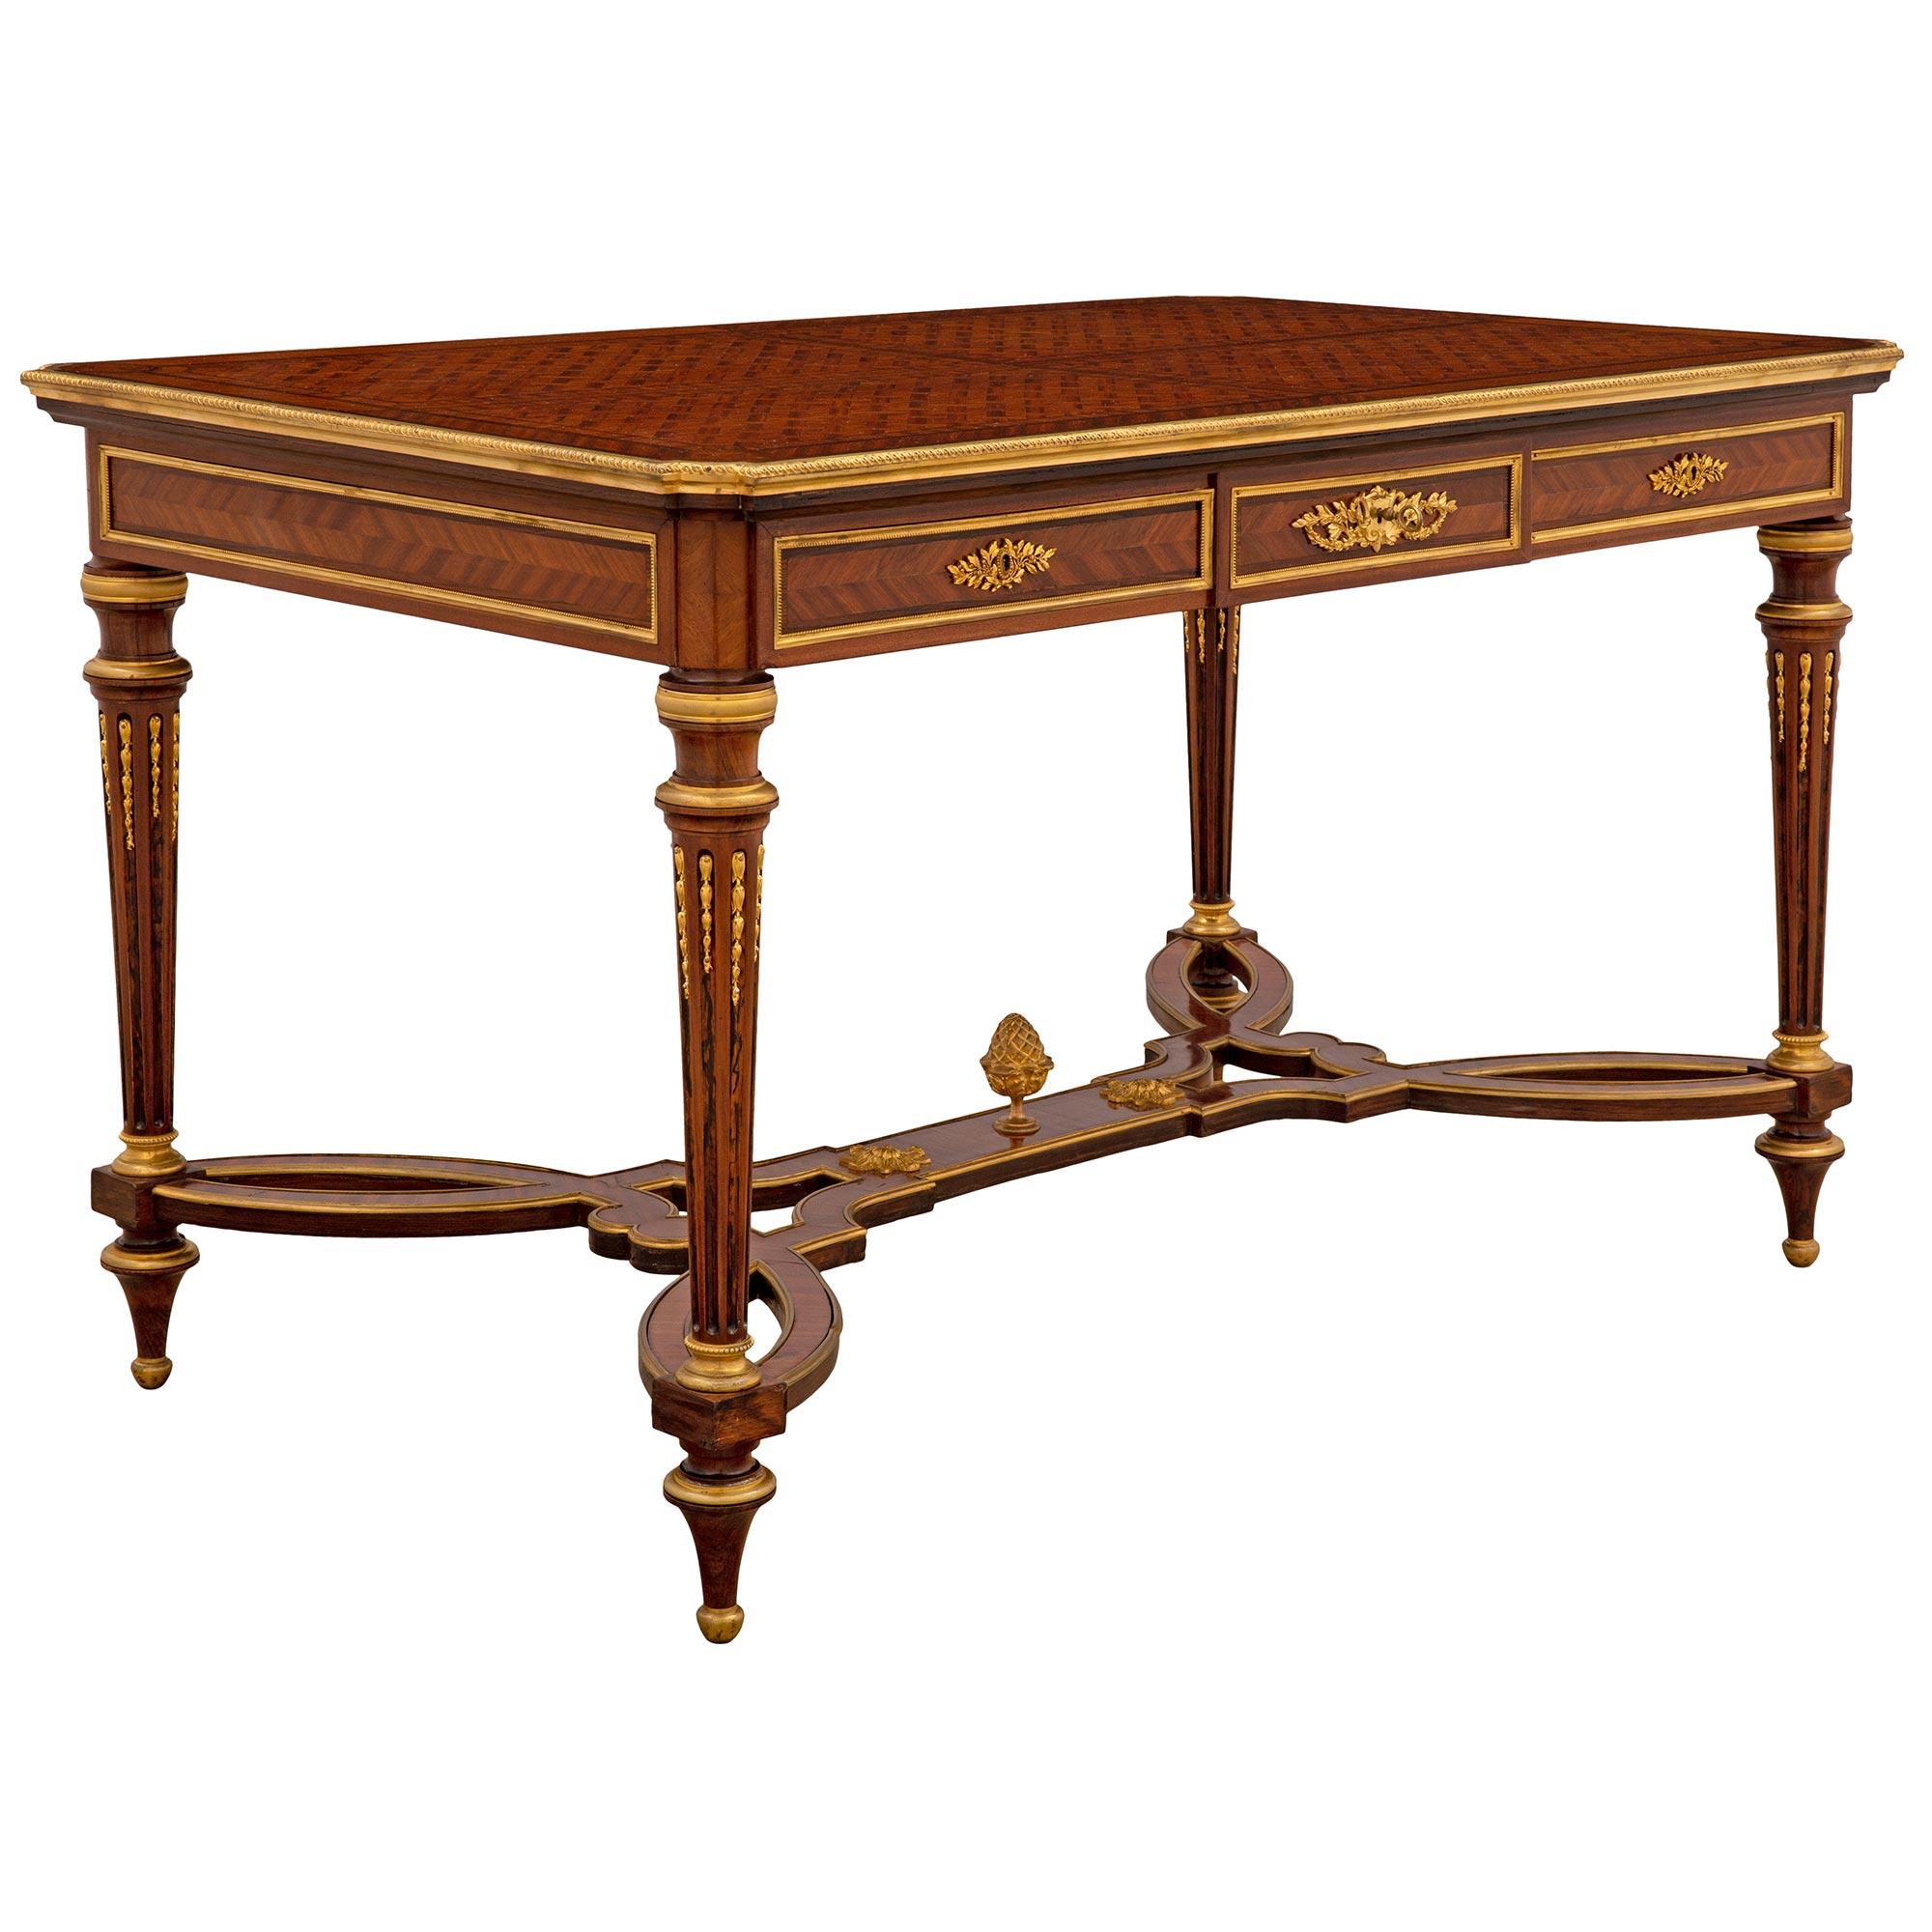 French 19th Century Louis XVI Style Tulipwood and Ormolu Center Table For Sale 1